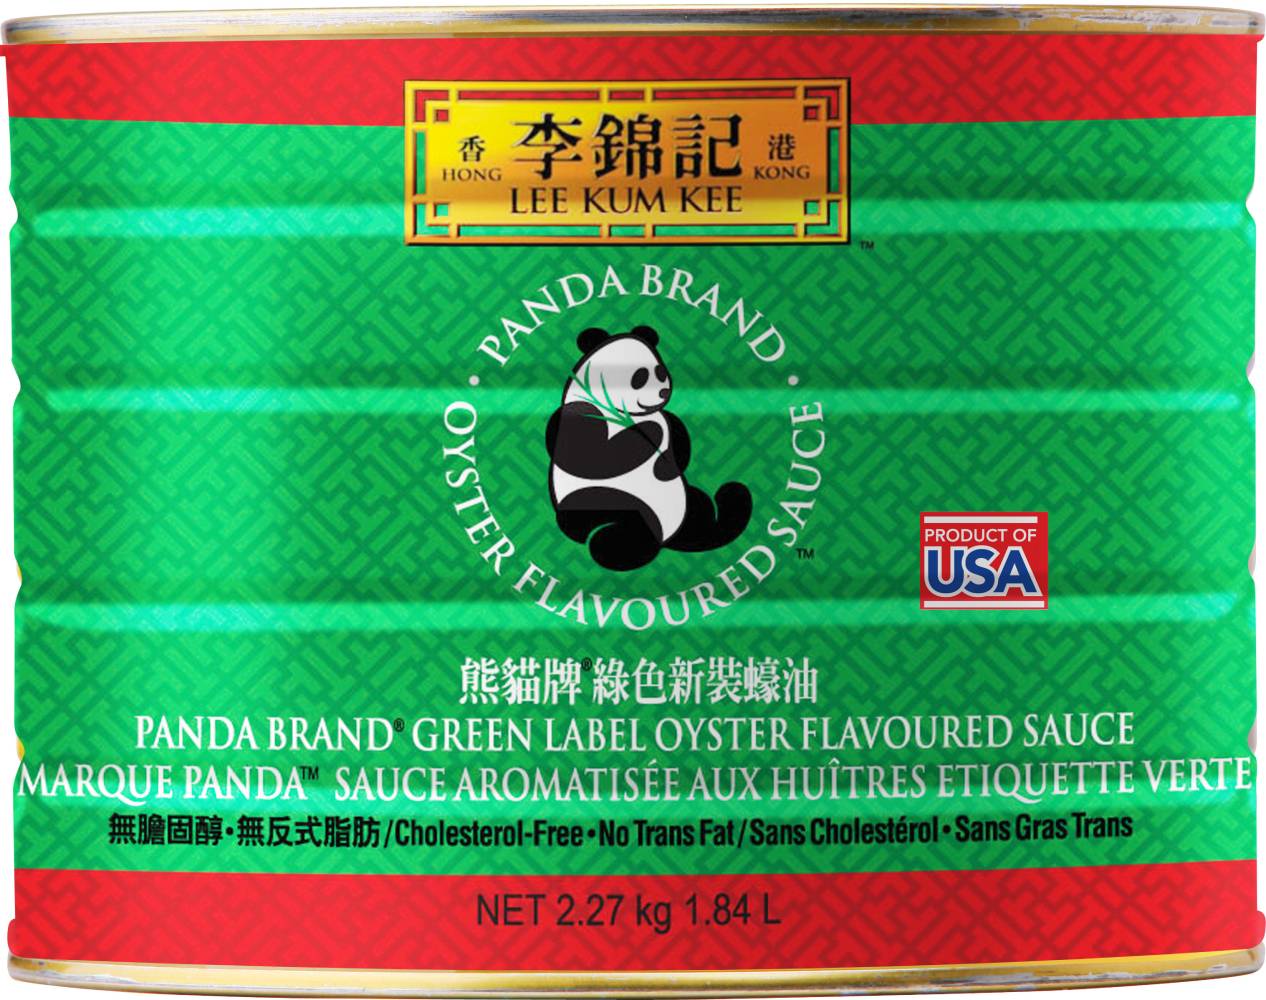 Panda Brand Green Label Oyster Flavoured Sauce 2.27kg 